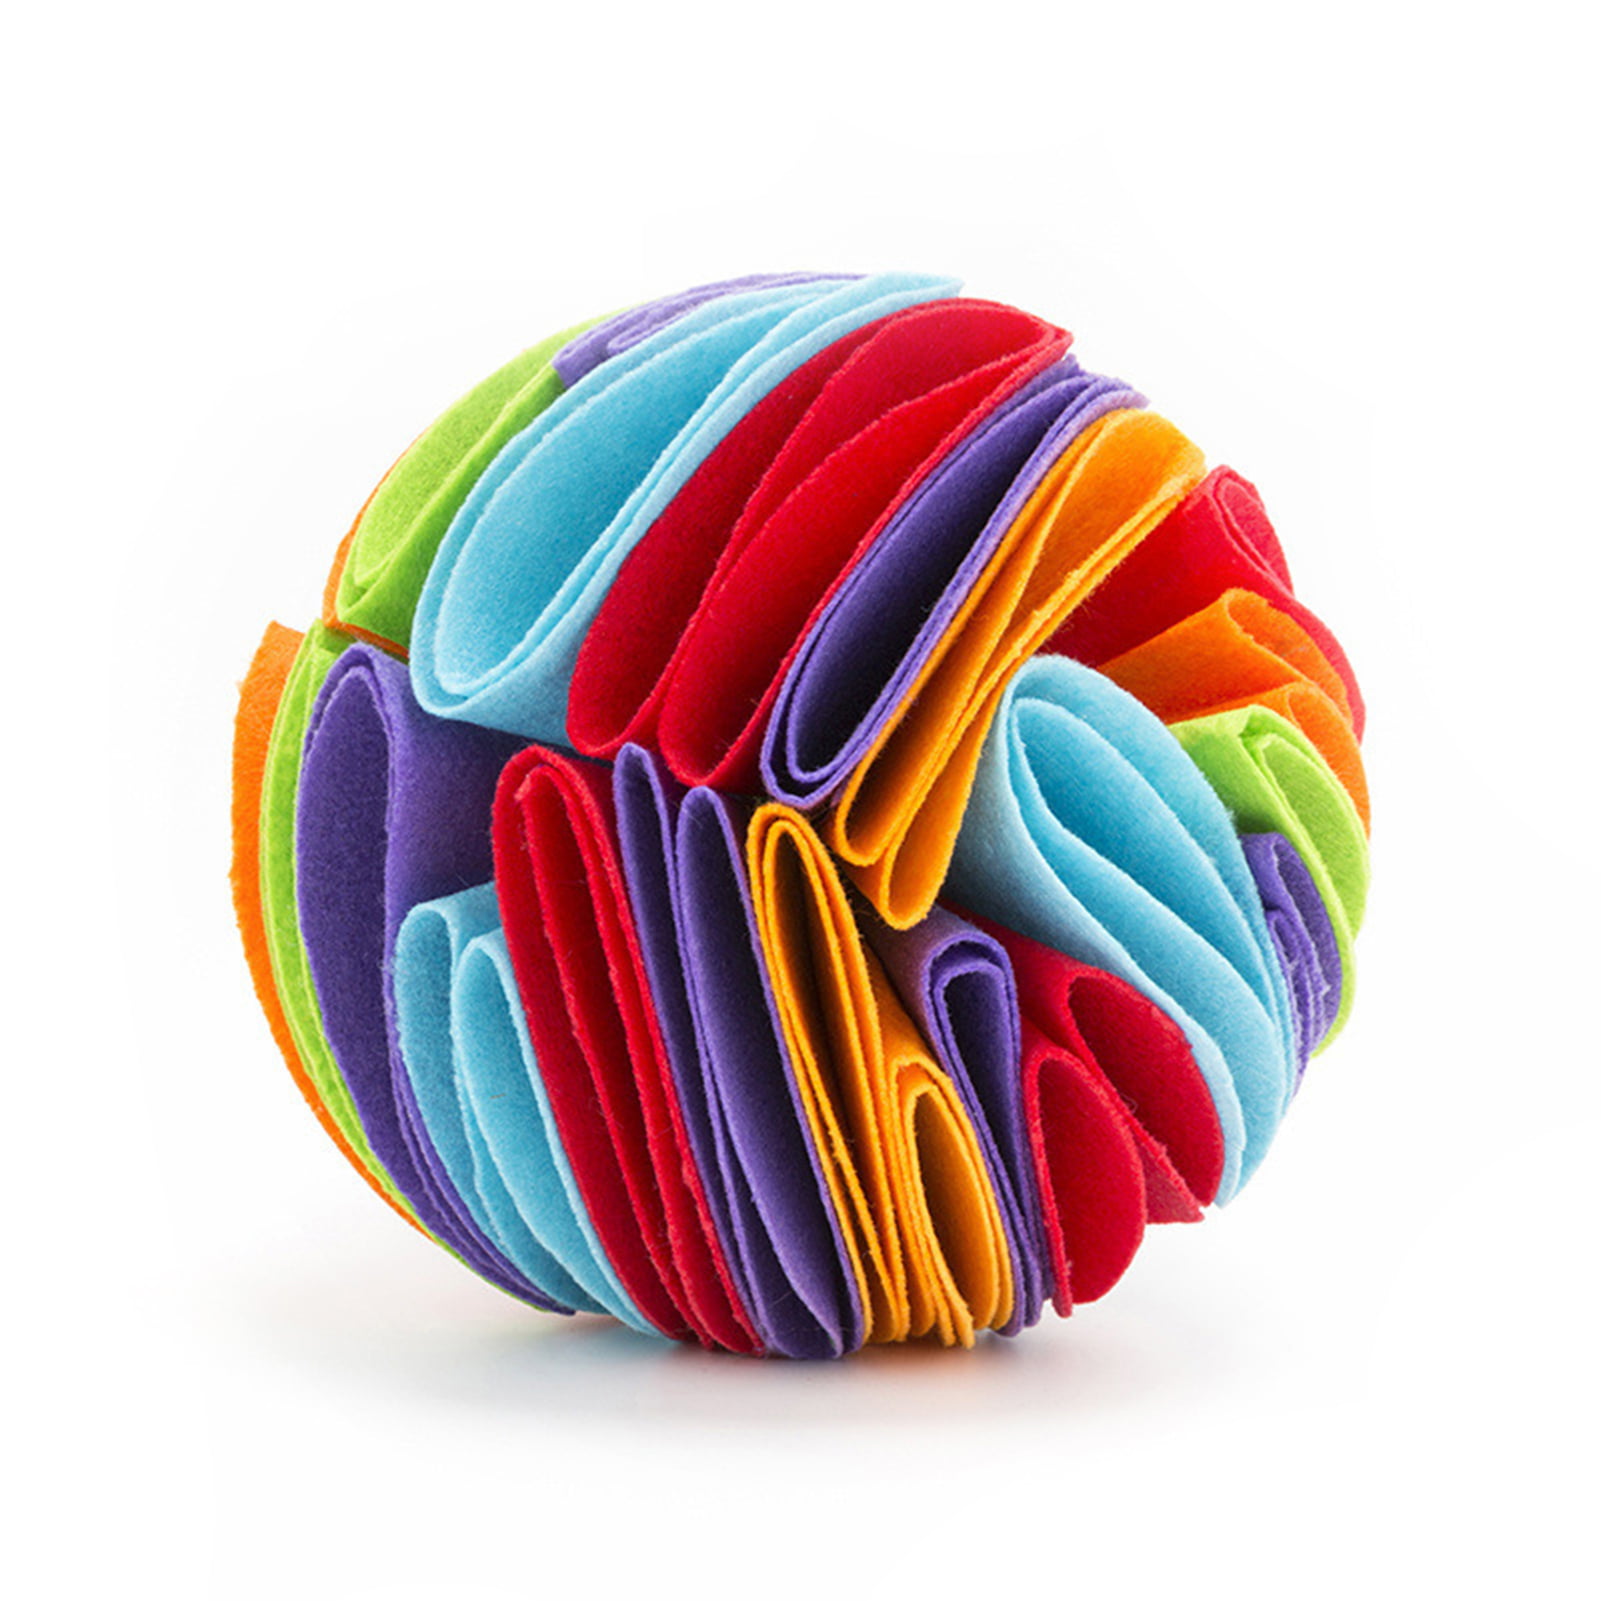 FABRIC SNUFFLE BALL PET TREAT PUZZLE TOY : Petface by LeisureGrow